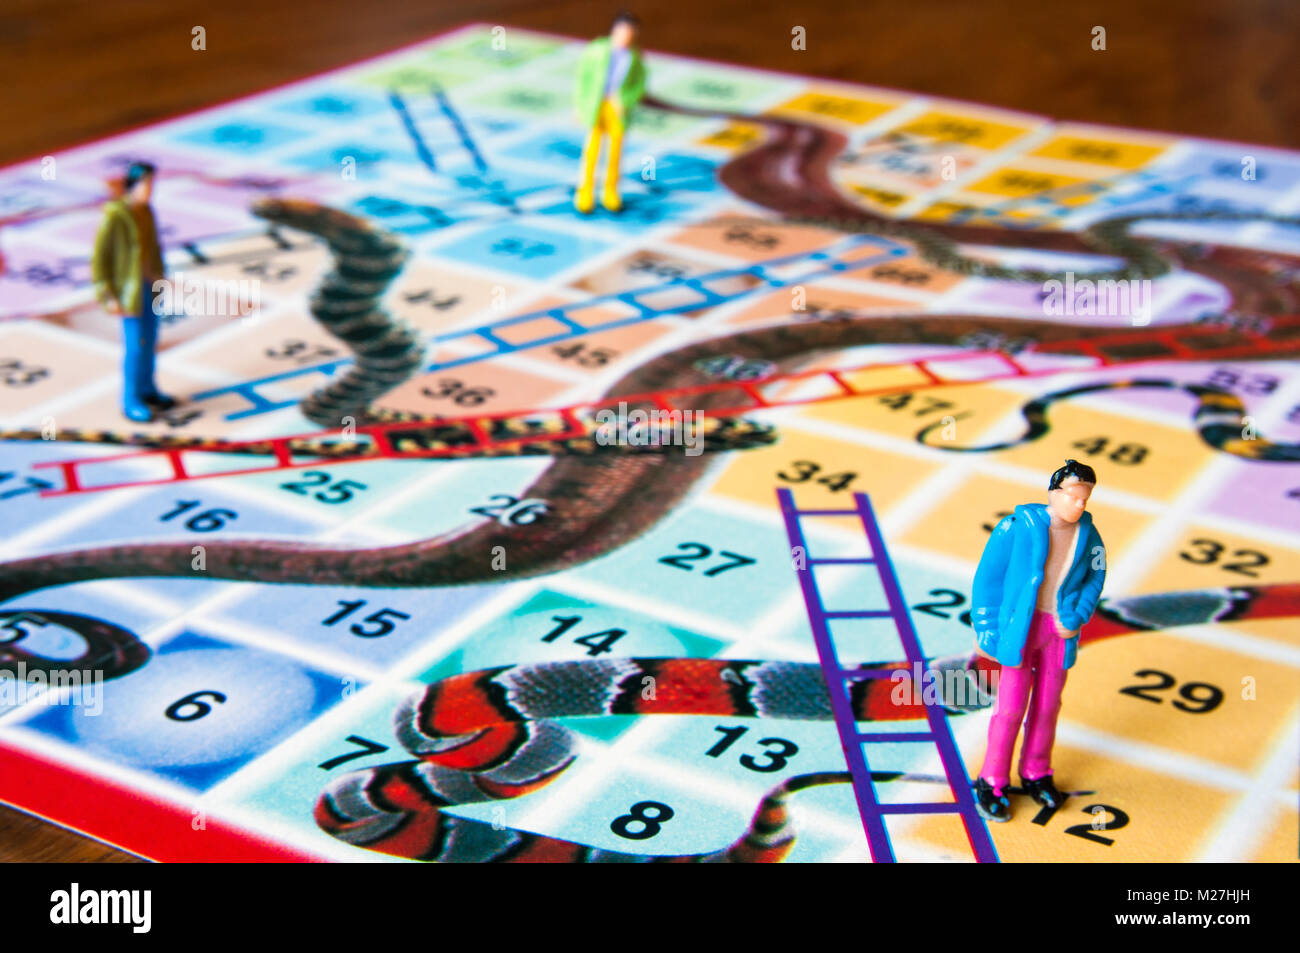 Snakes and ladders board with miniature human figures in studio setting, Melbourne, Australia Stock Photo